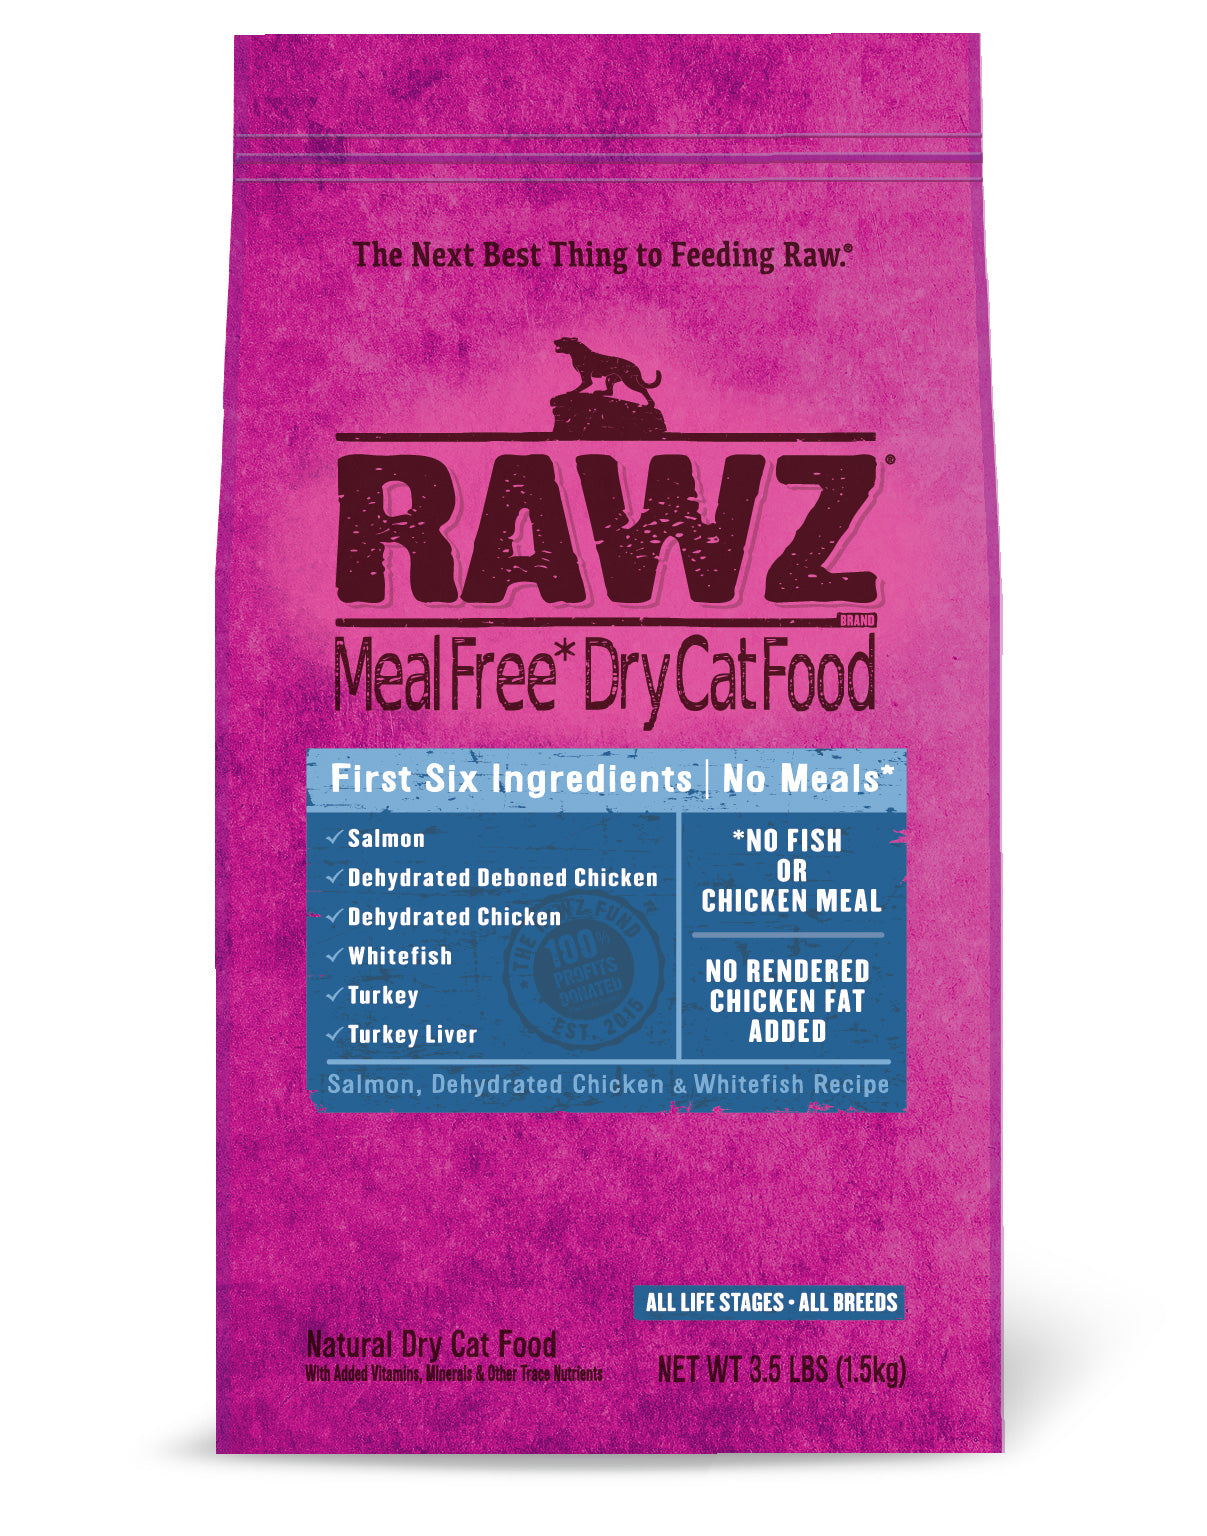 Rawz Meal Free Dehydrated Chicken, Salmon, and Whitefish Recipe, Dry Cat Food